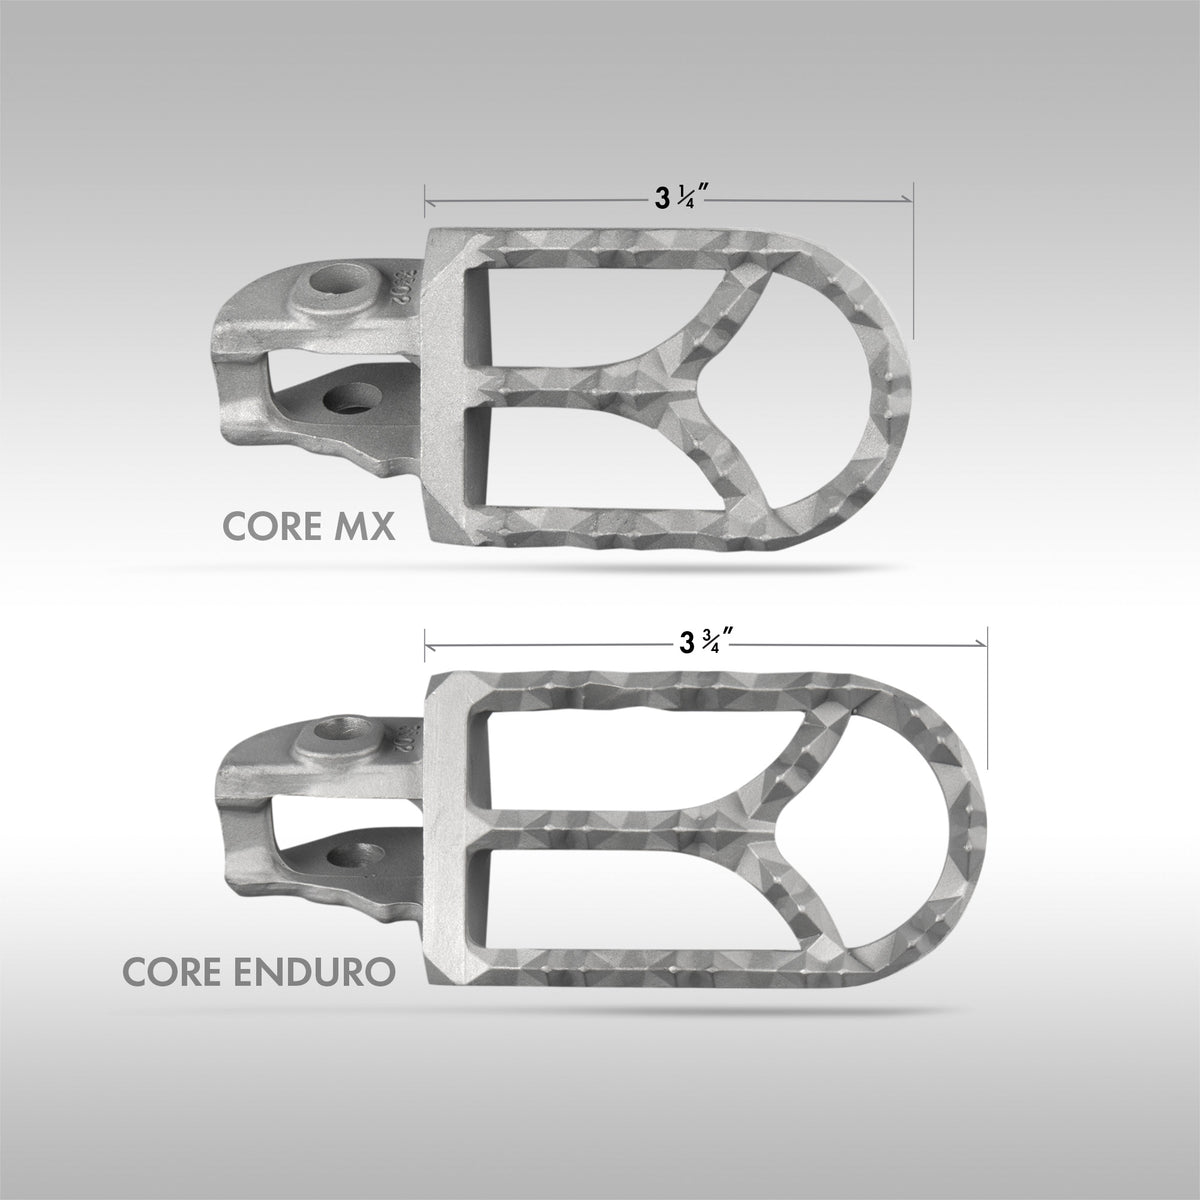 IMS PRODUCTS - CORE MX FOOT PEGS - YAMAHA